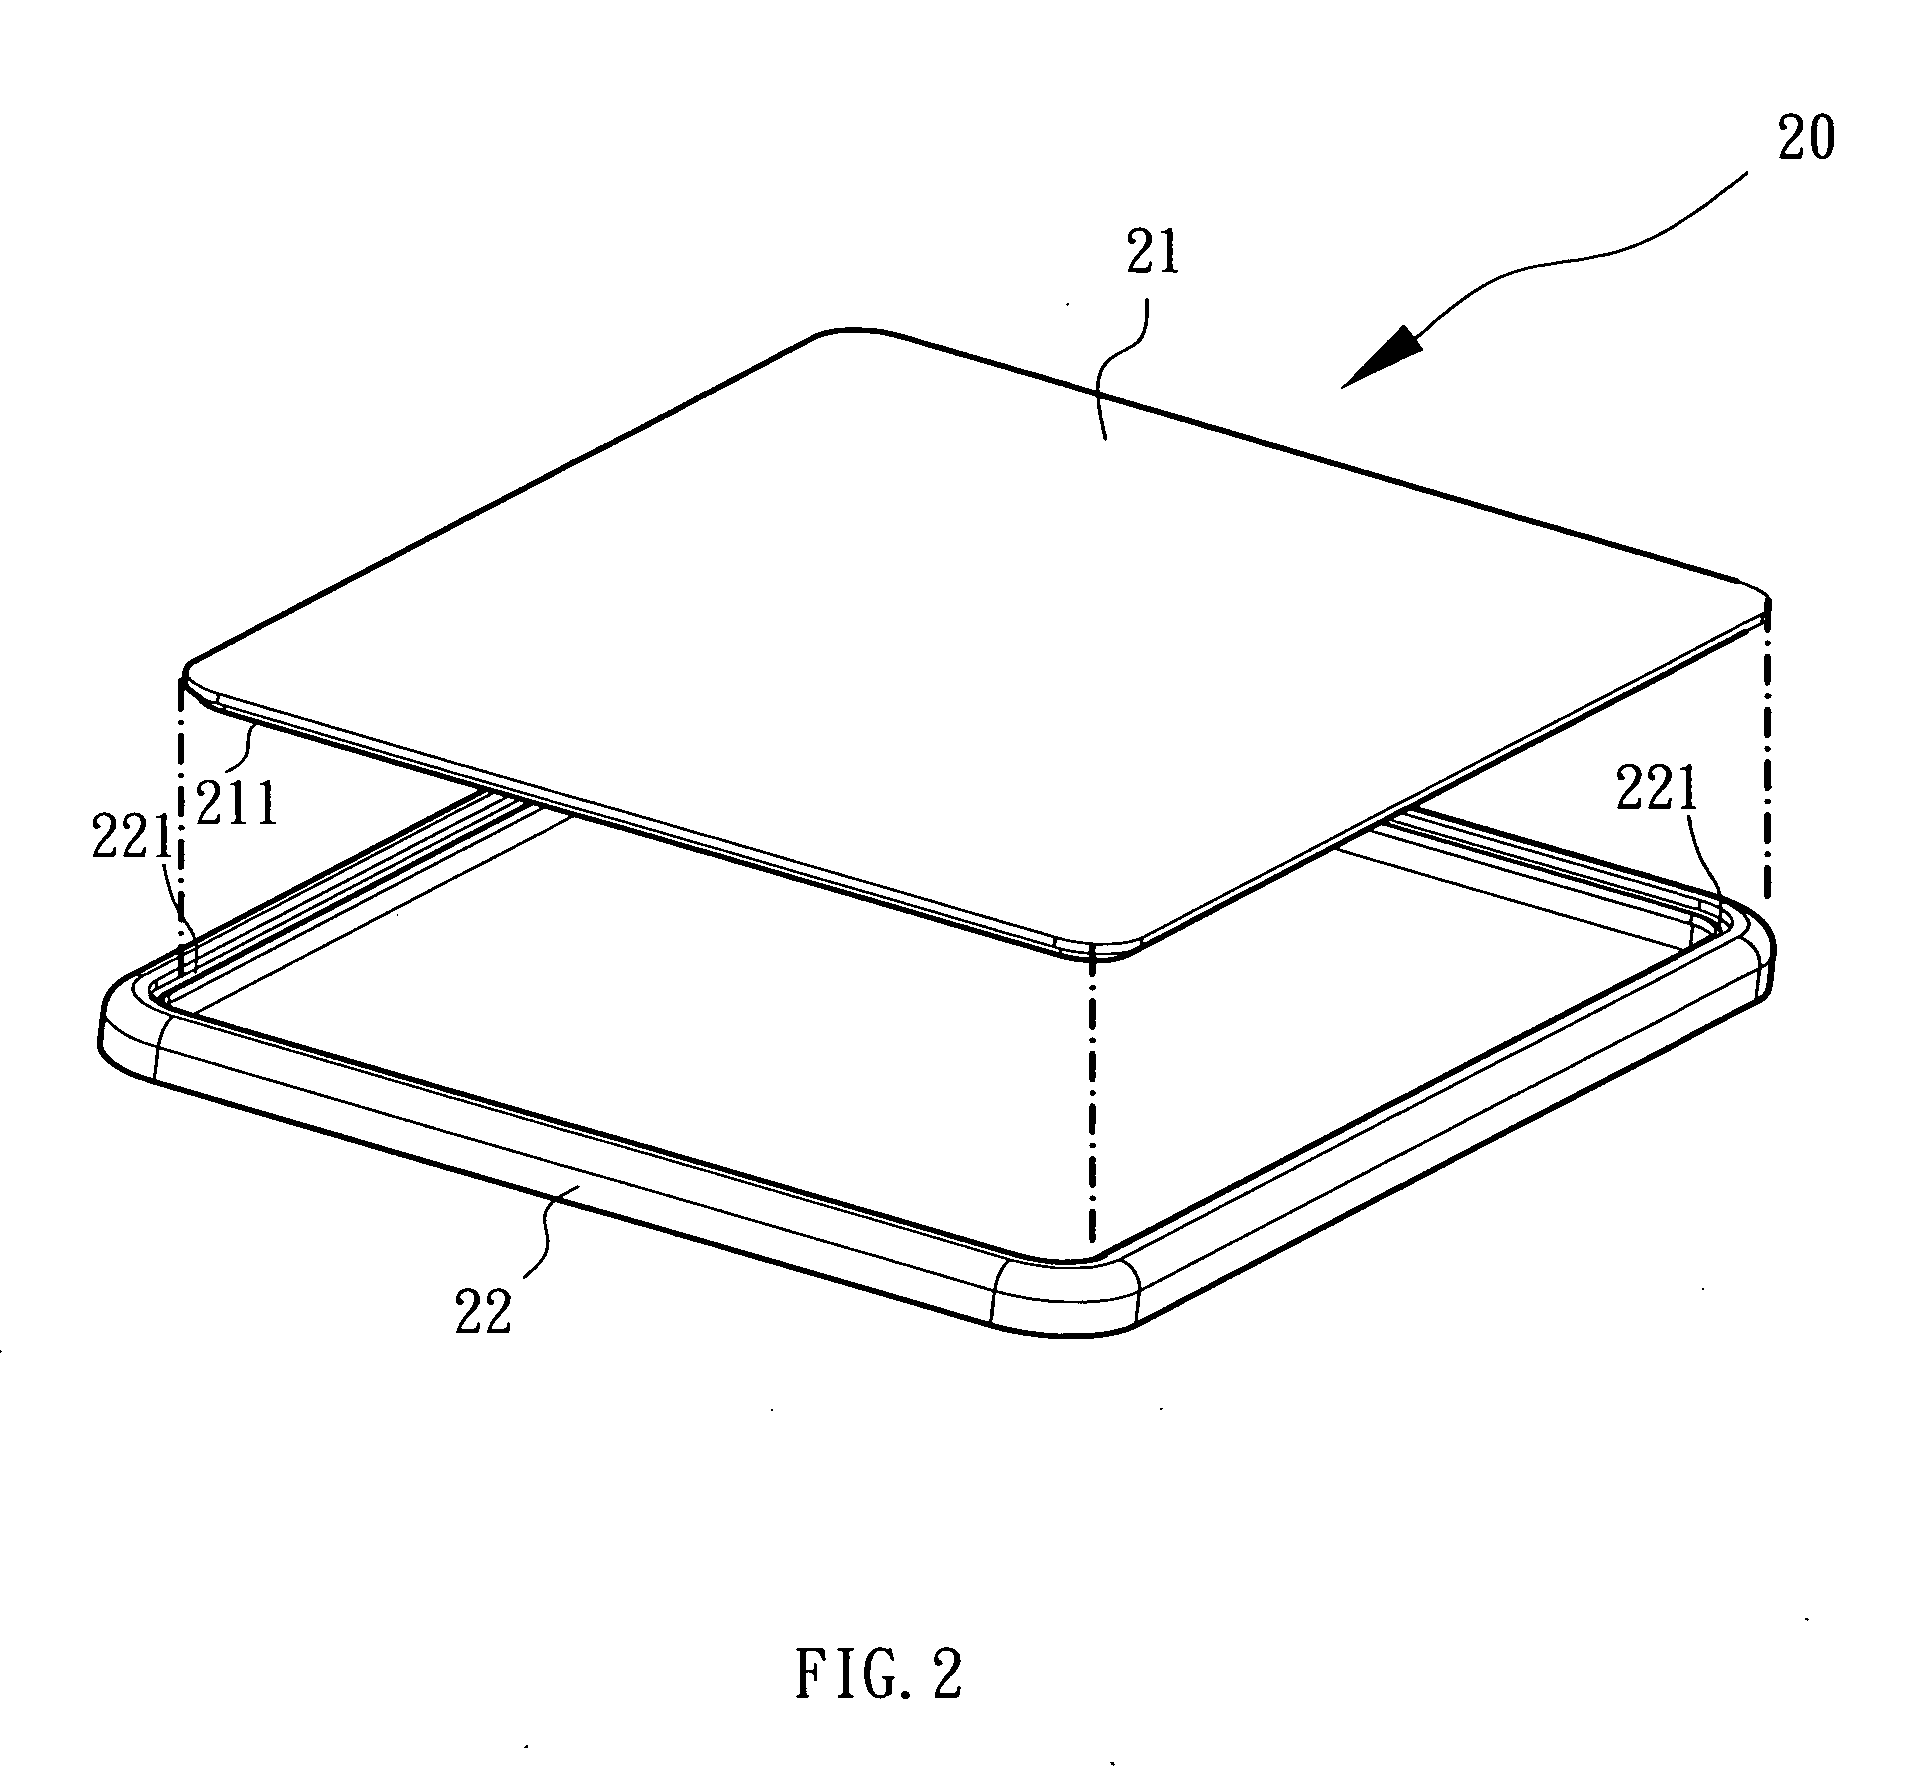 Replacing-type upper cover plate structure of notebook computer